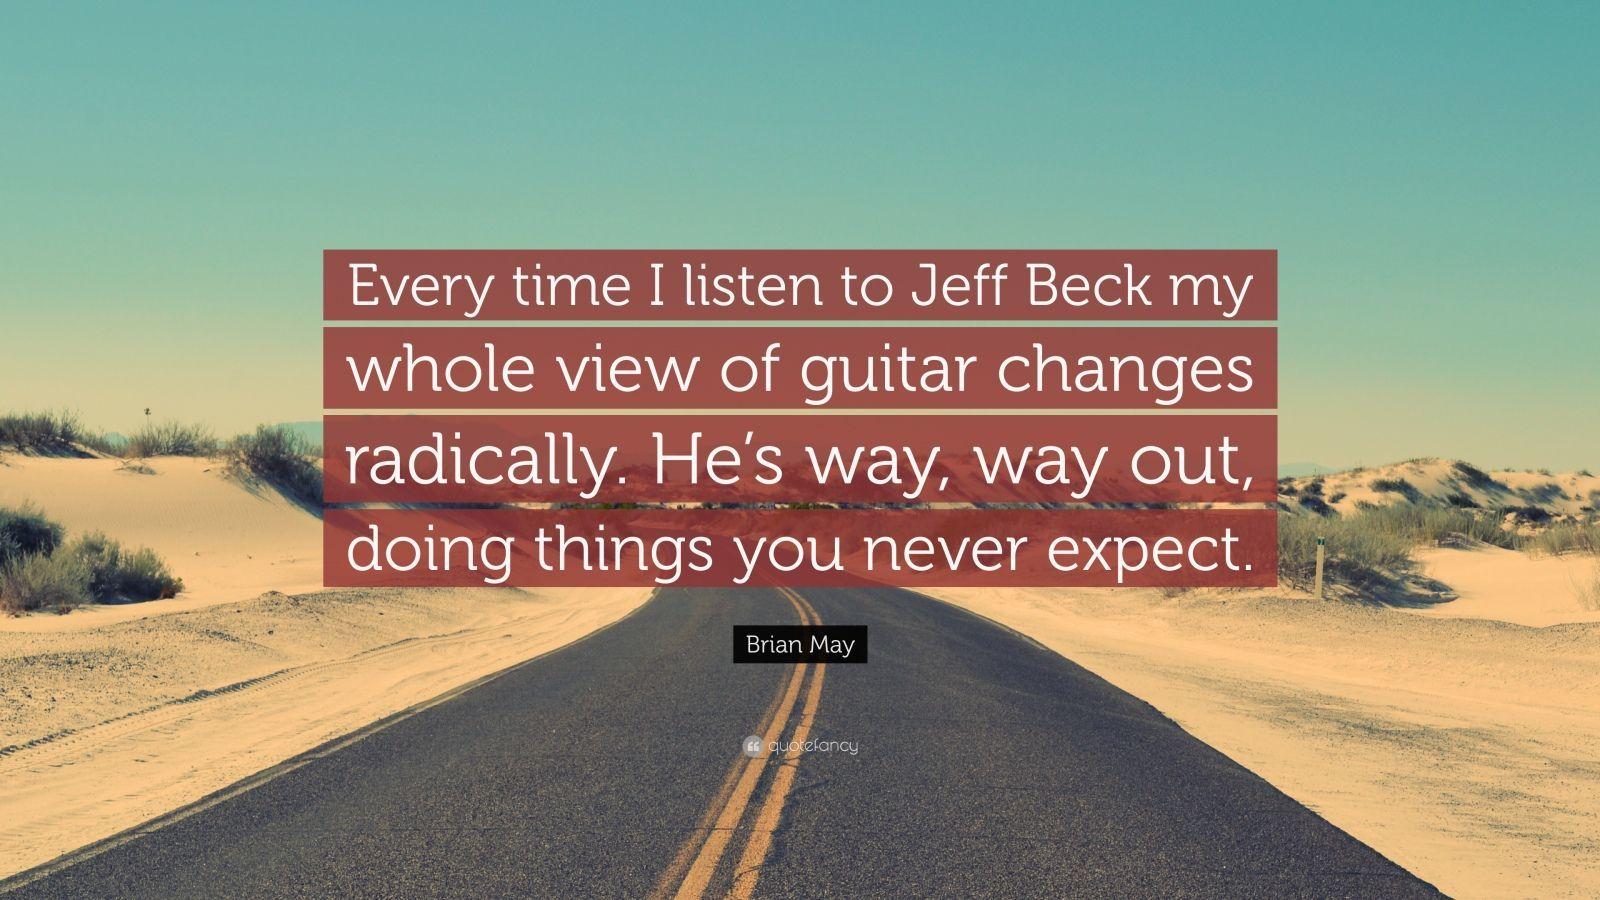 Brian May Quote: “Every time I listen to Jeff Beck my whole view